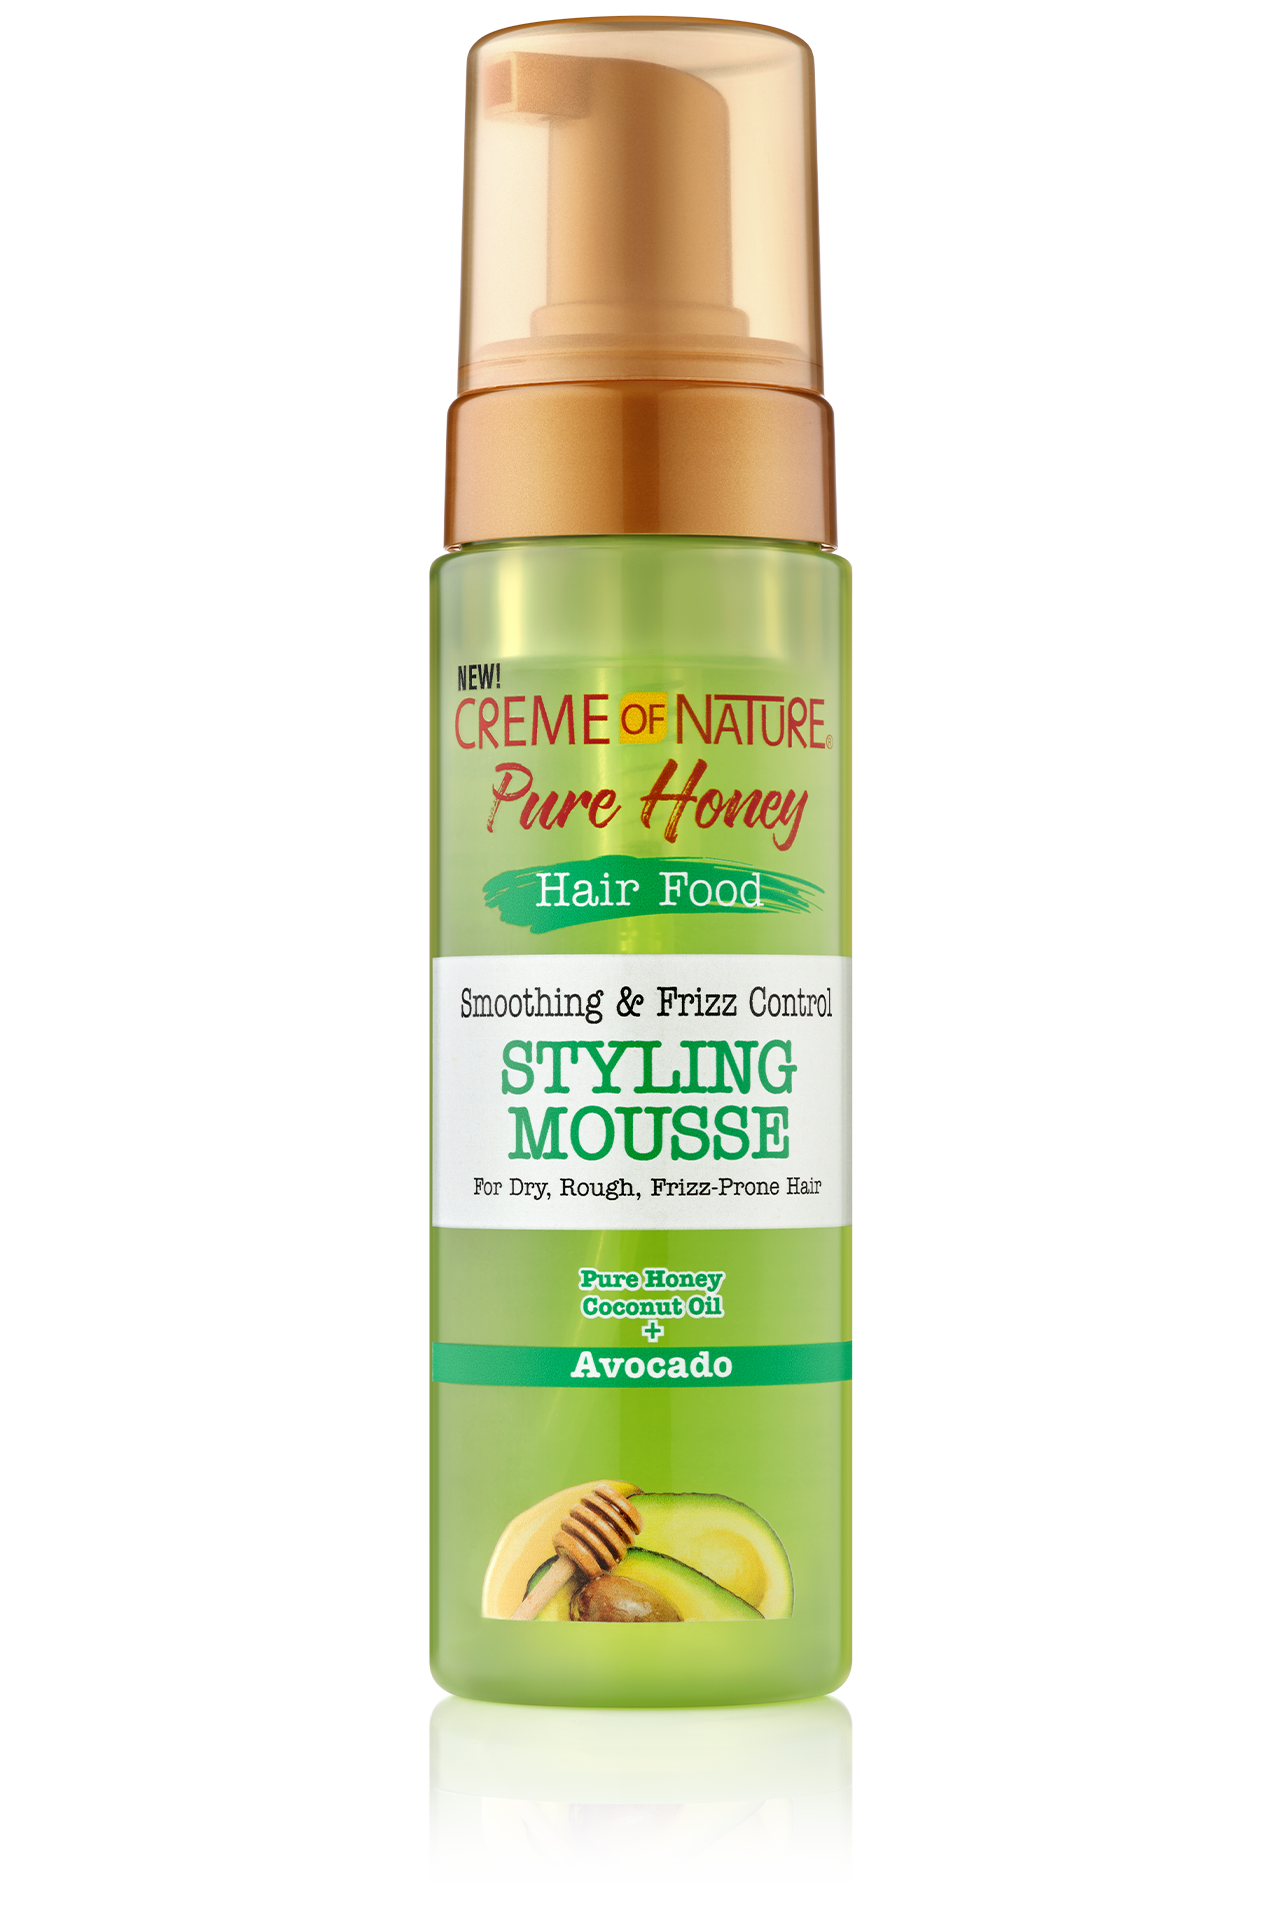 Creme of Nature Smoothing & Frizz Control Styling Mousse - 7 oz